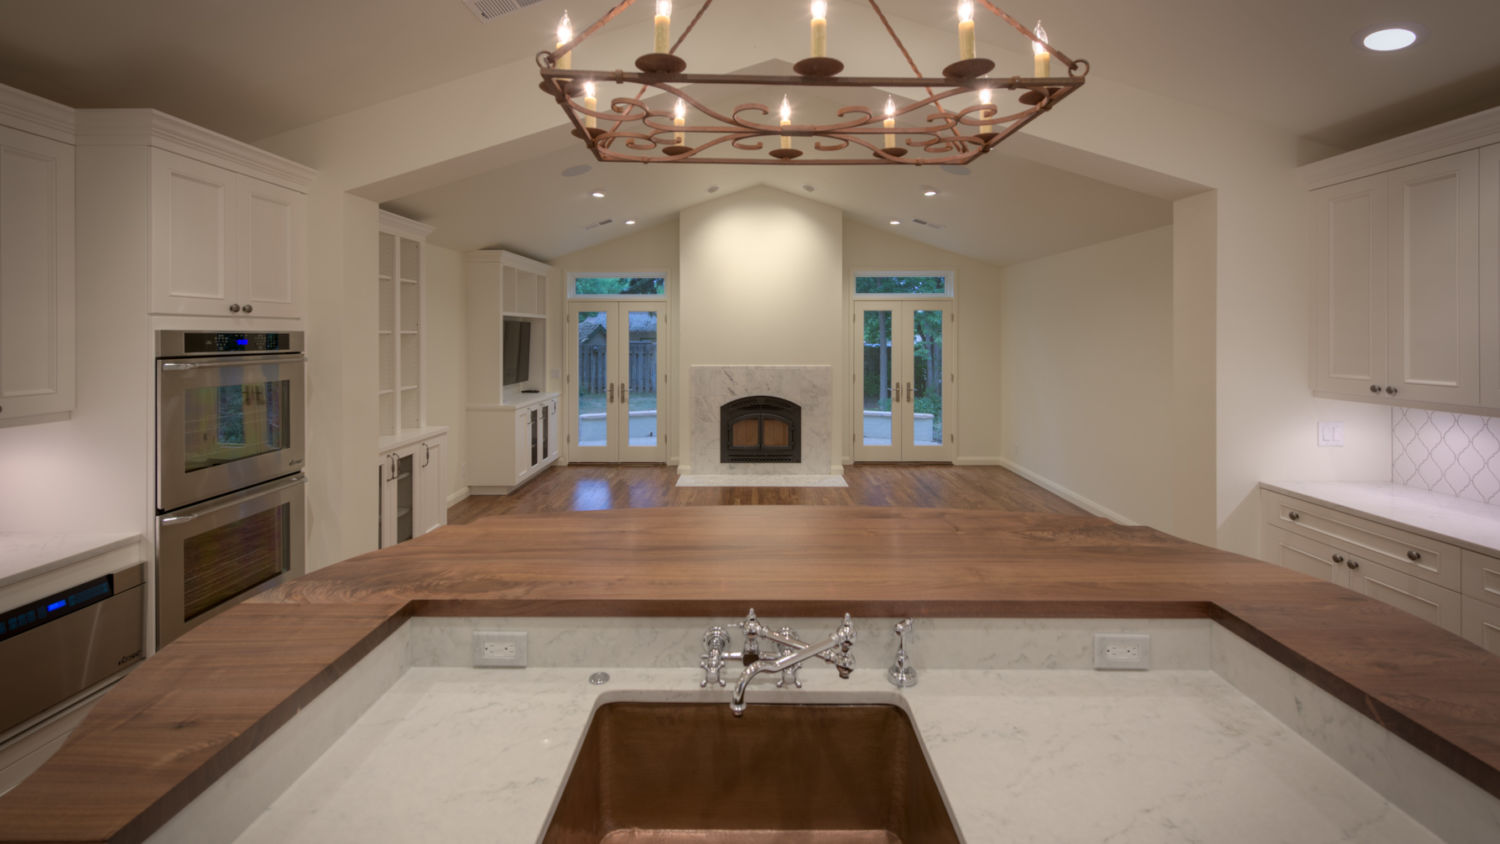 HighCraft-Builders-traditional-kitchen-remodel-white-fireplace-custom-butcher-block-counter-copper-sink